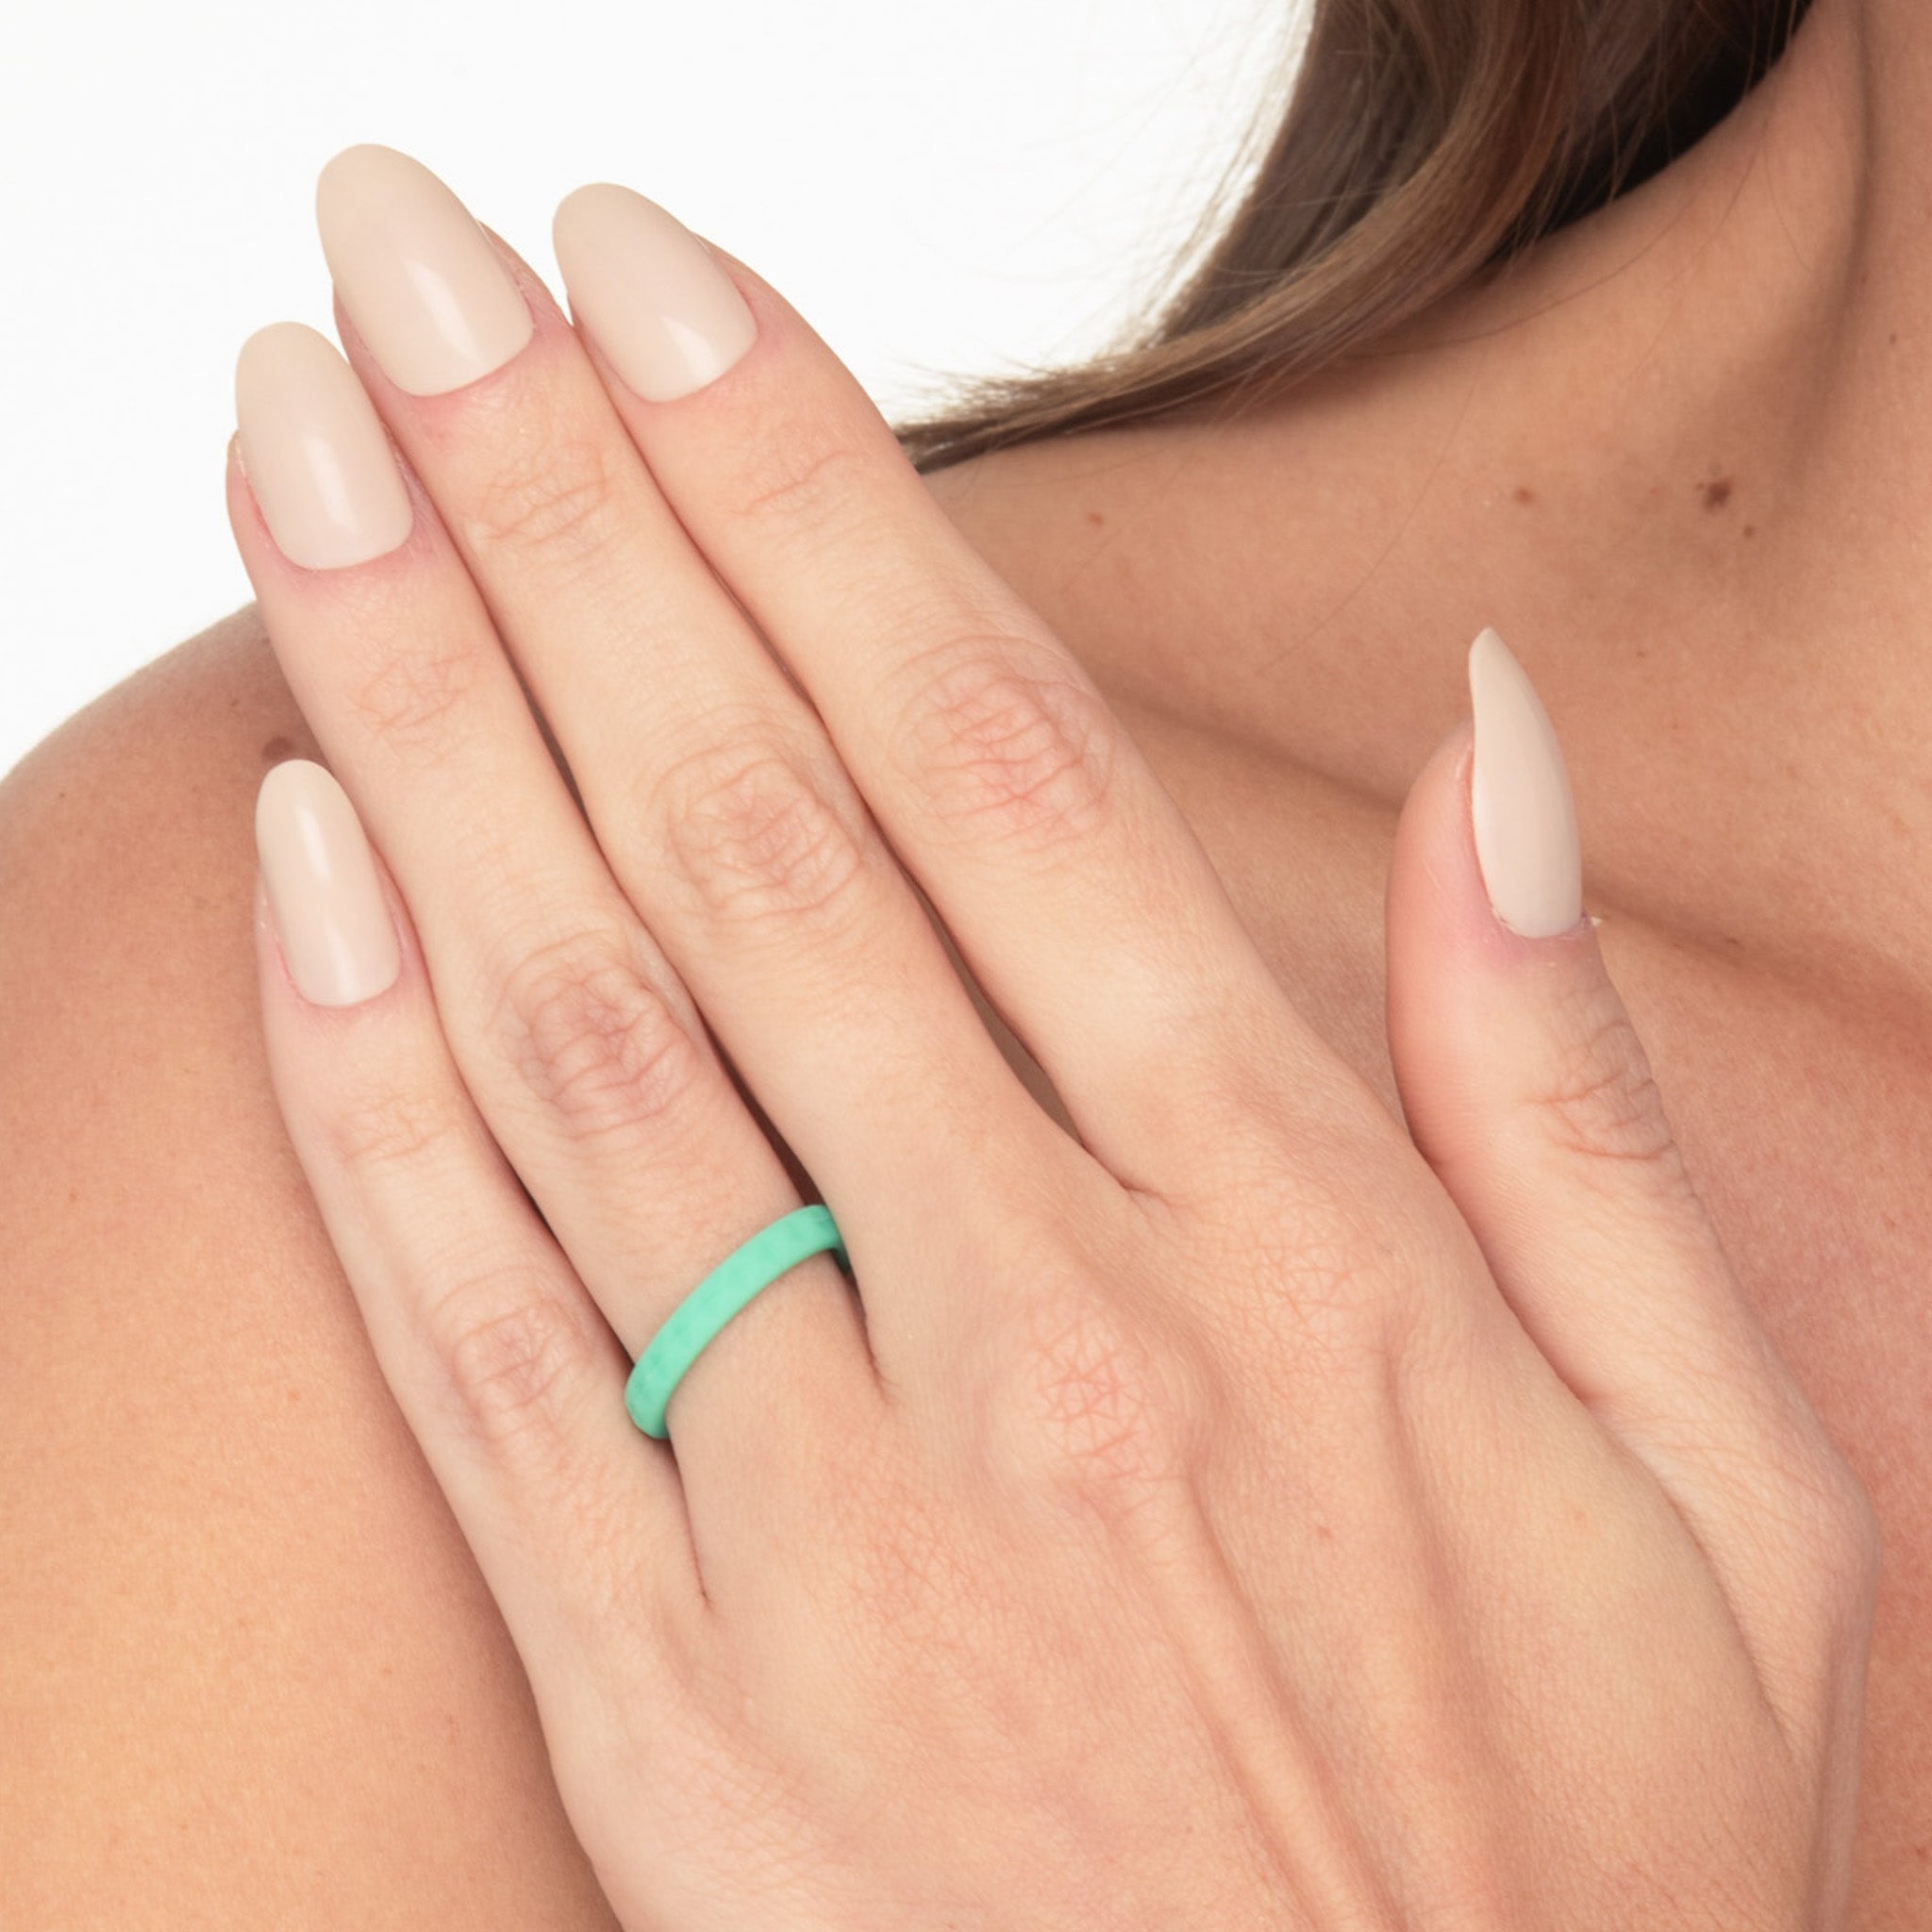 The Turquoise Tranquility - Silicone Ring